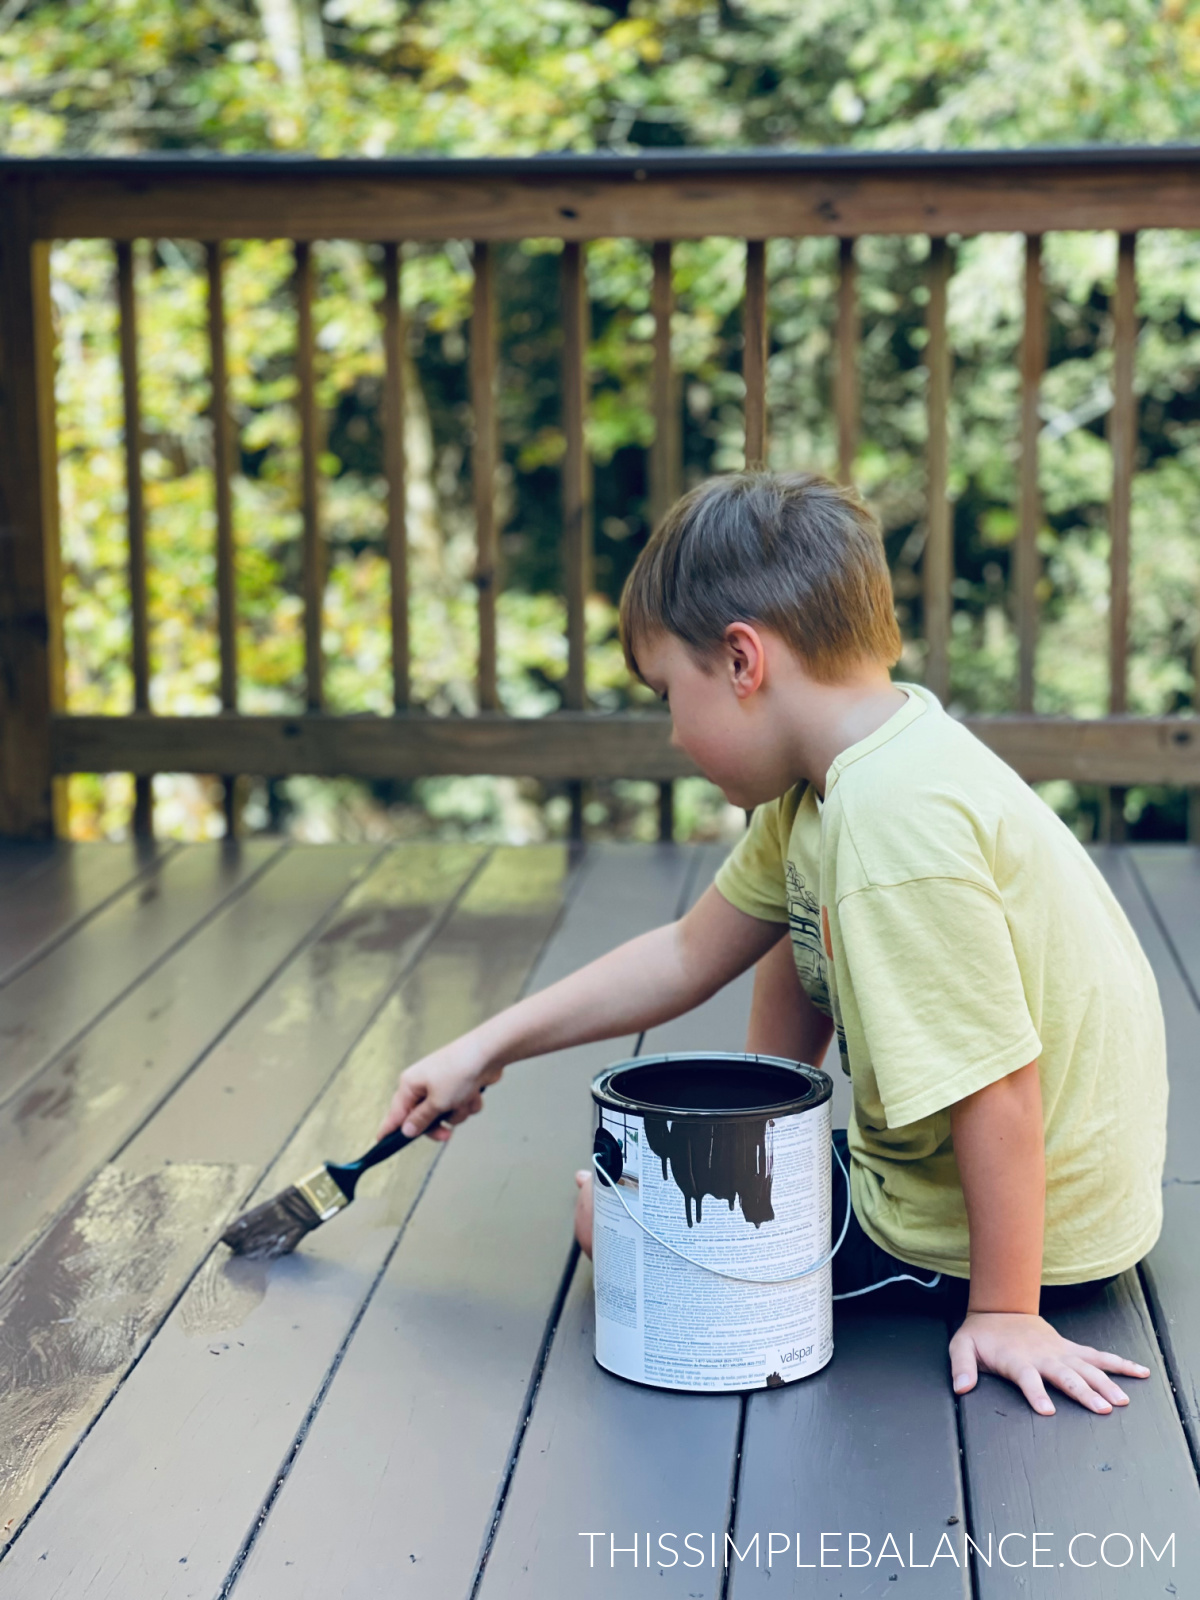 child painting deck instead of watching screens.